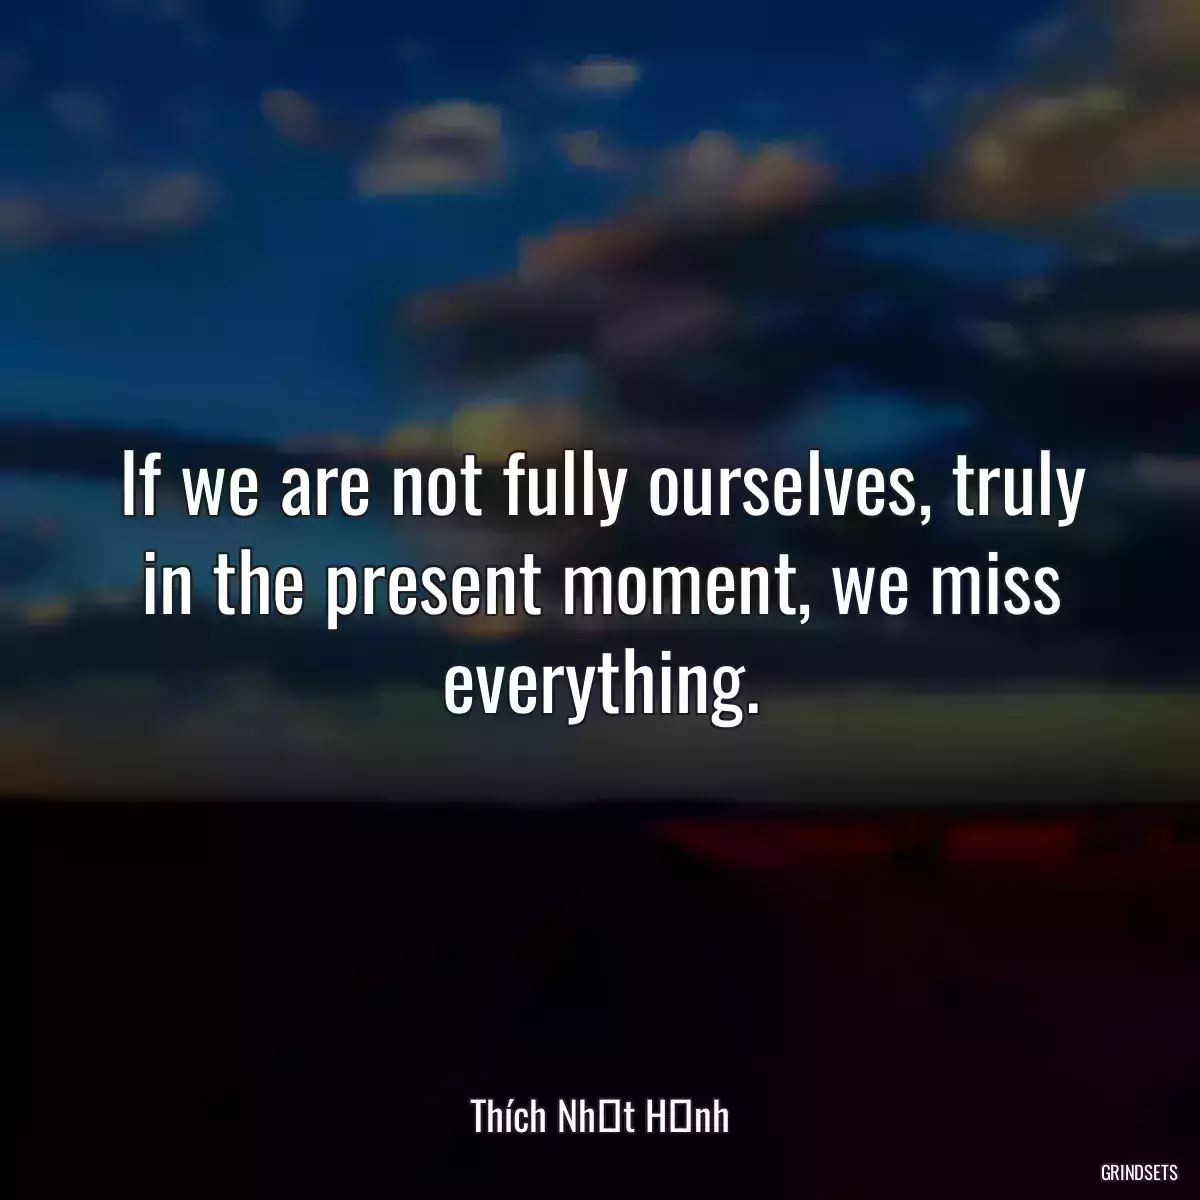 If we are not fully ourselves, truly in the present moment, we miss everything.